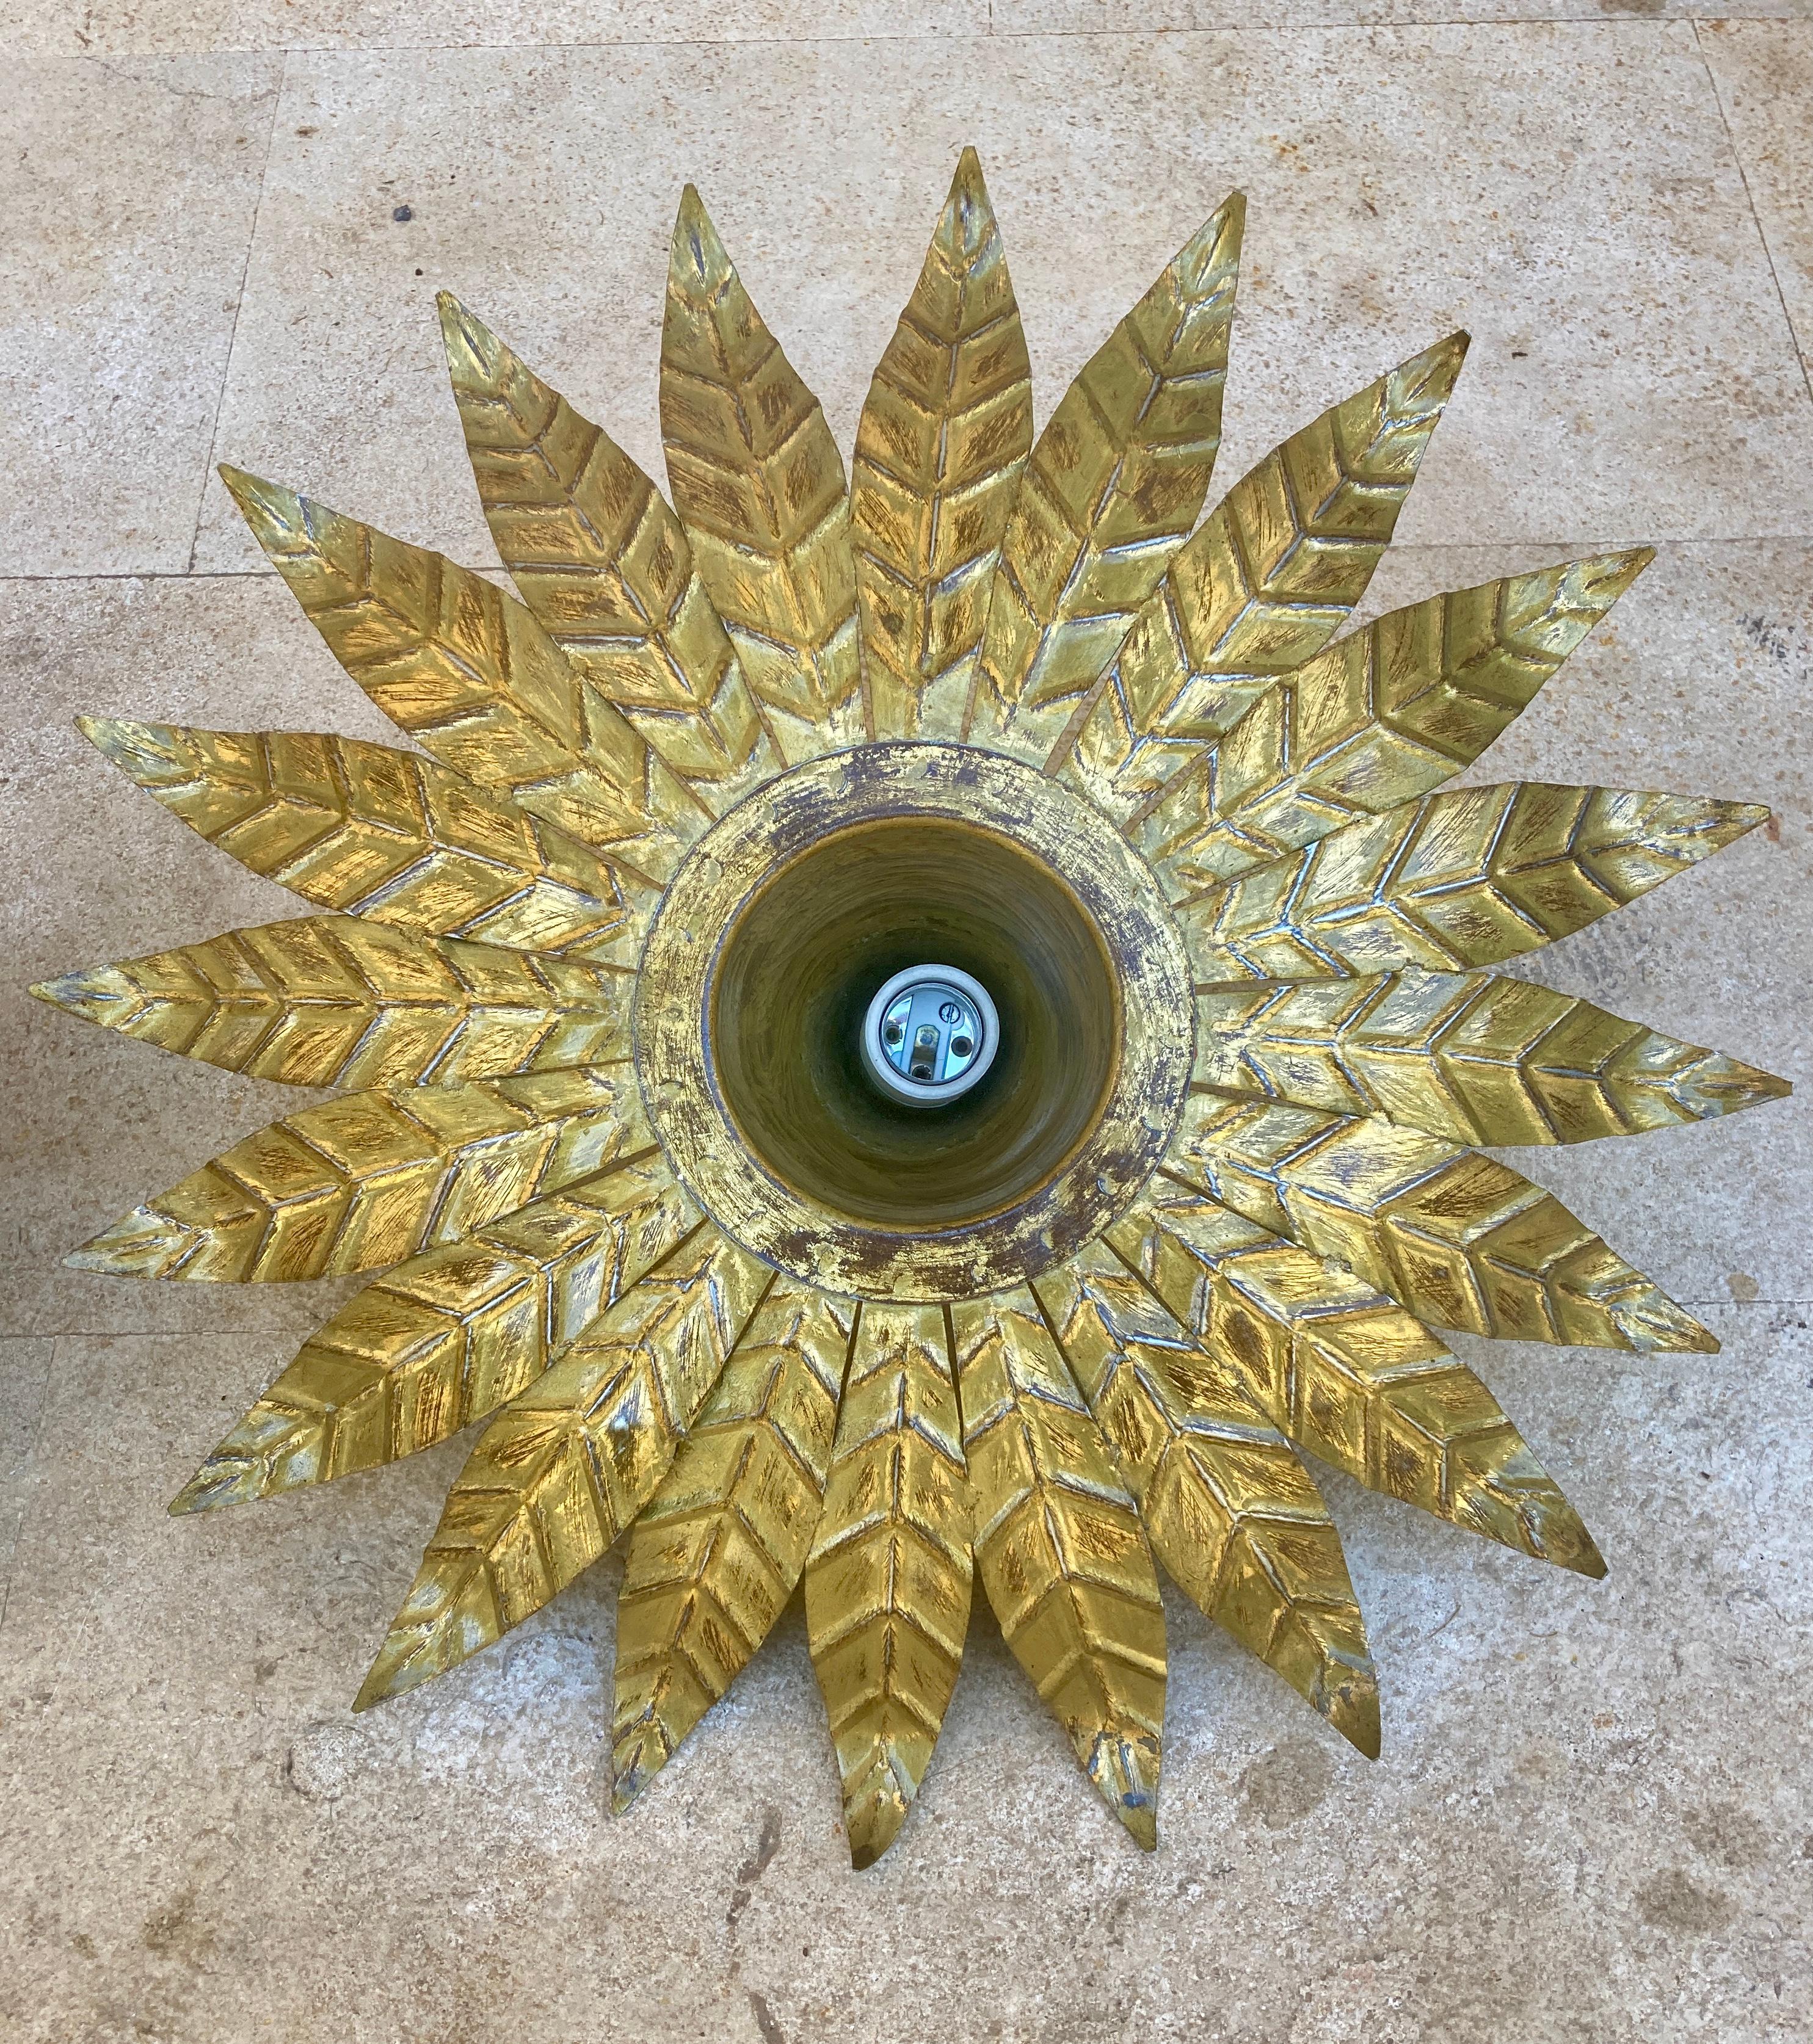 Pair of Mid-Century Spanish Sunburst Ceiling Light Fixture or Wall Sconce in Wro In Good Condition For Sale In Miami, FL